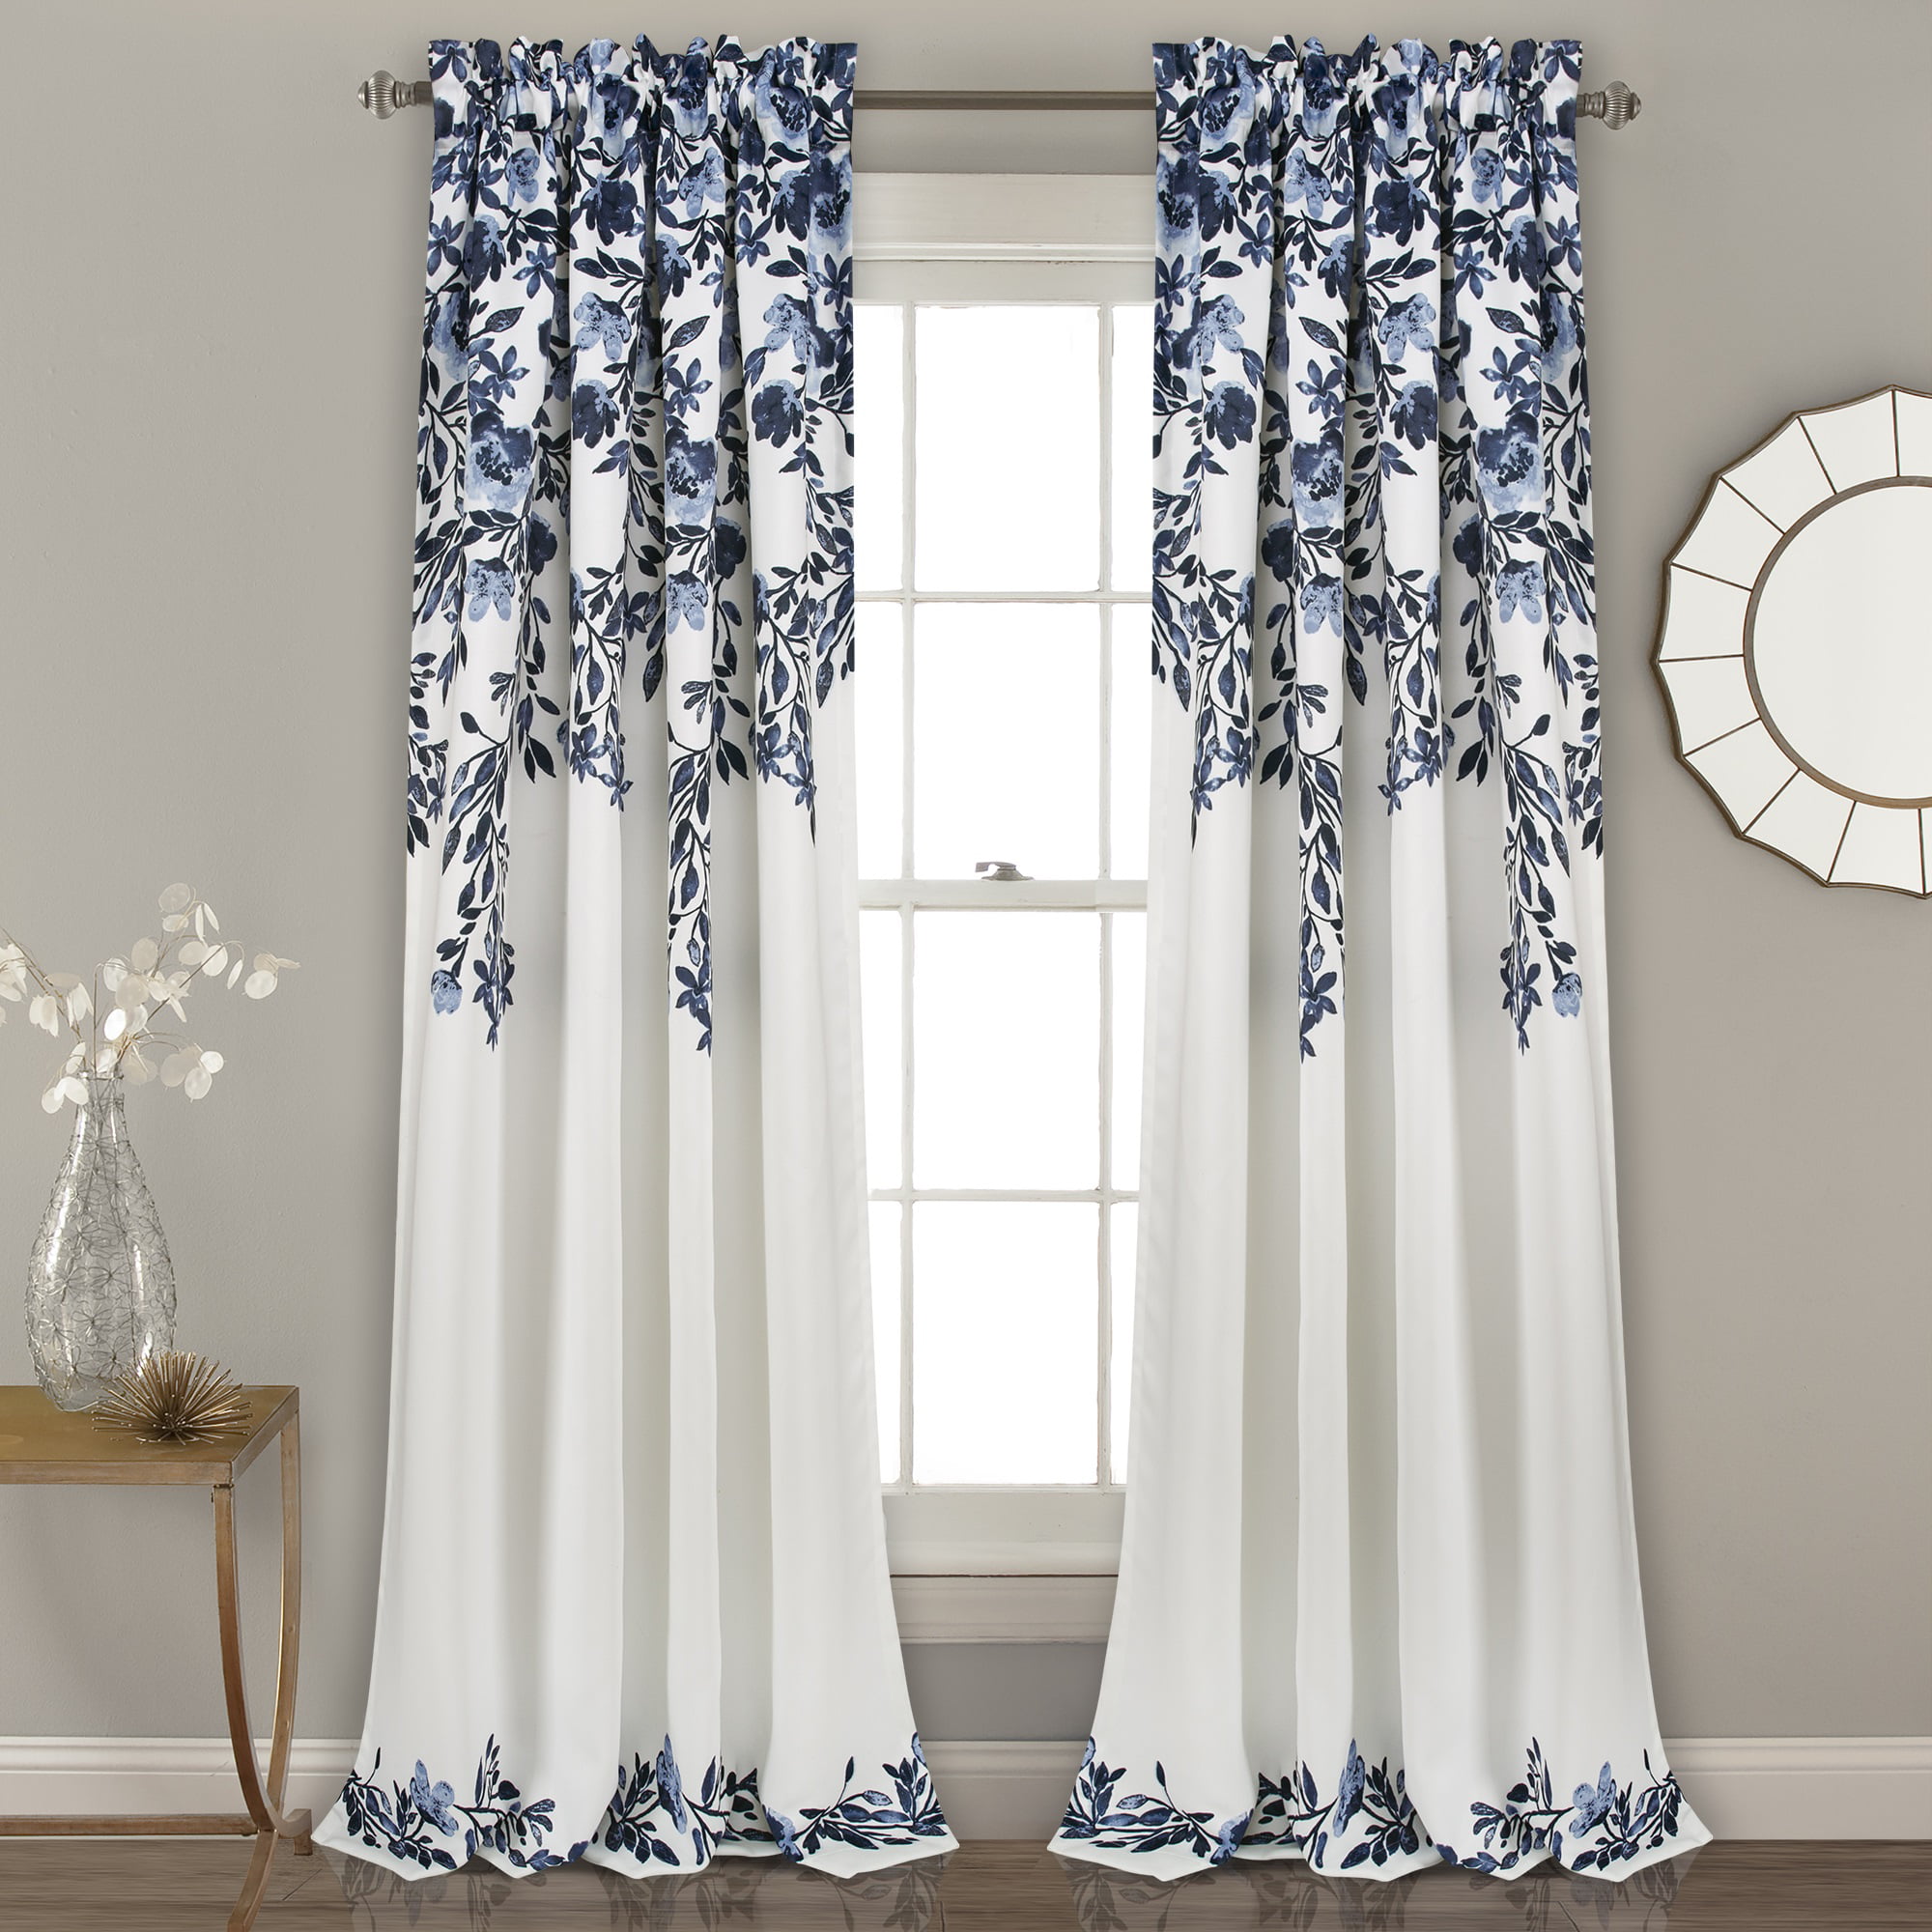 Shabby Chic Roses Window Valance Curtain Cotton 43"W x 15"L Details about   Powder Blue 